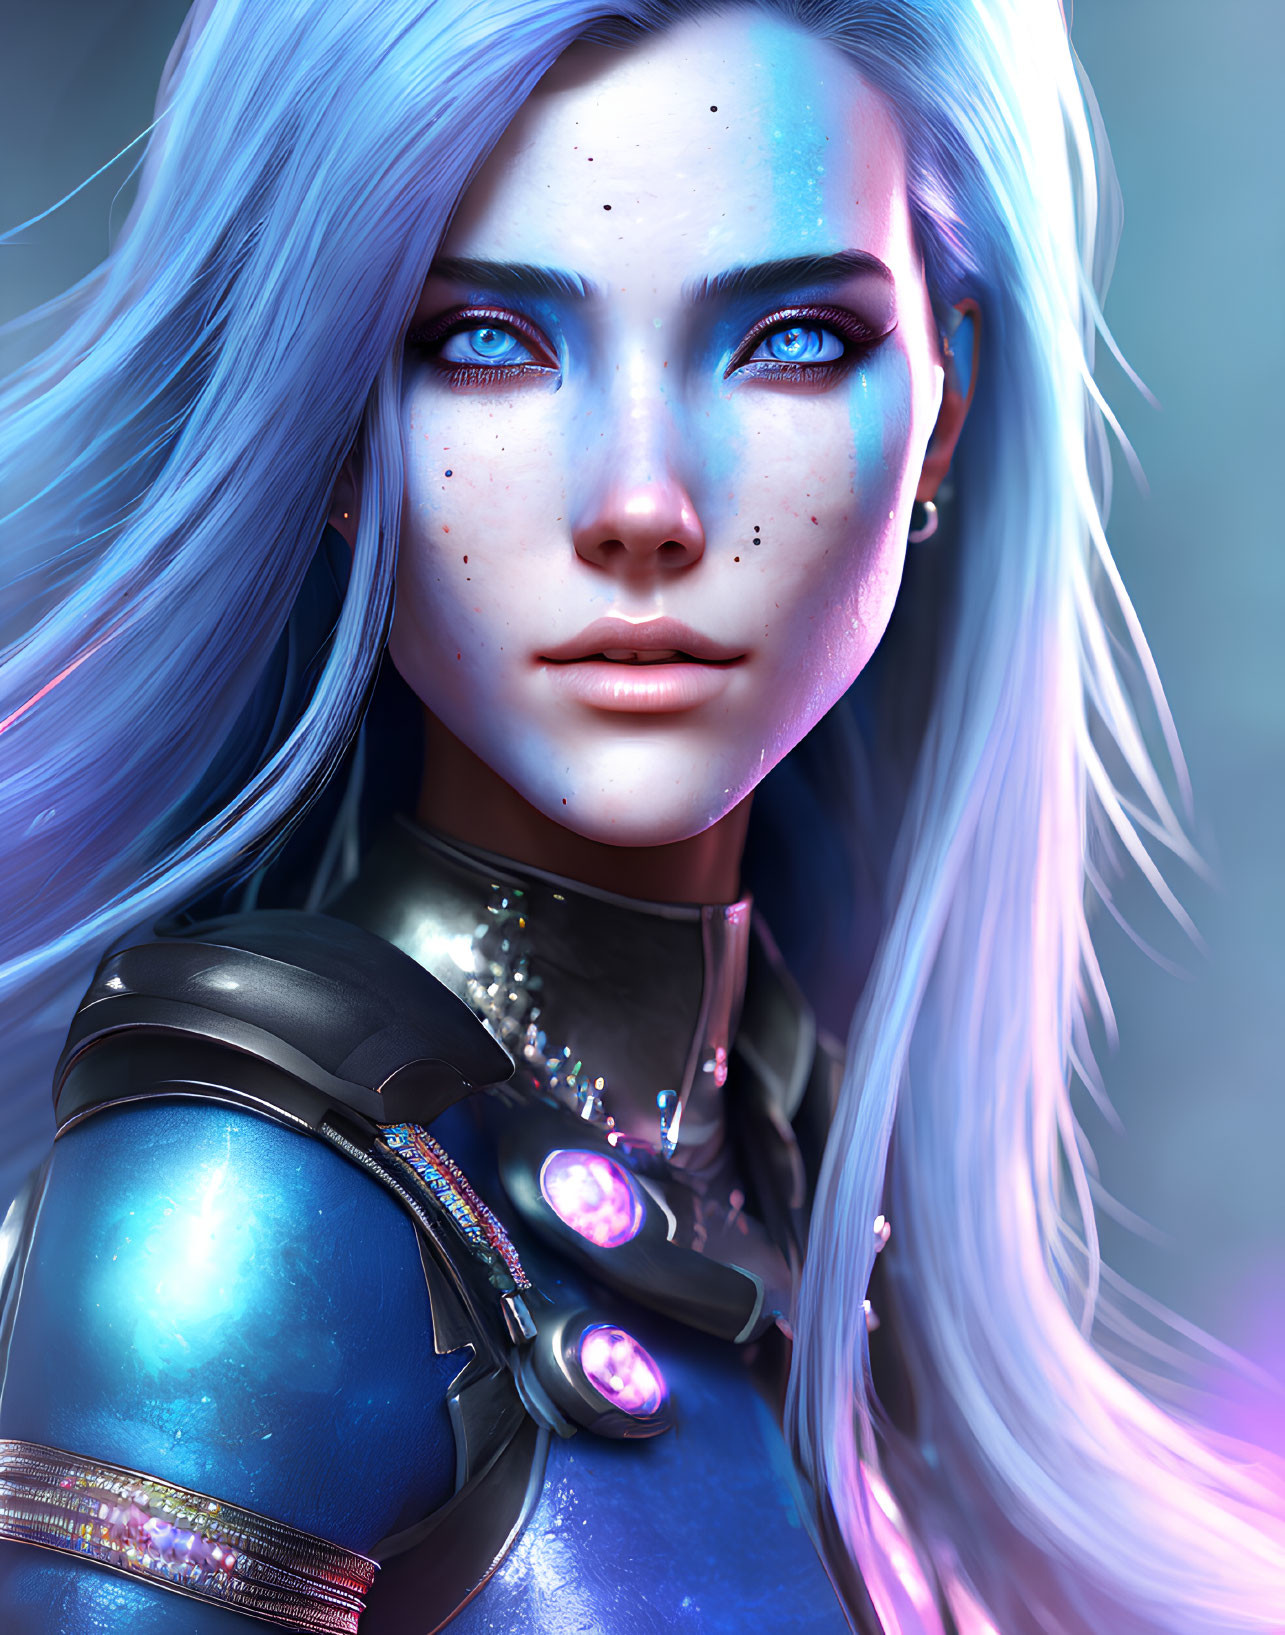 Digital artwork of woman with blue eyes, white hair, and futuristic armor